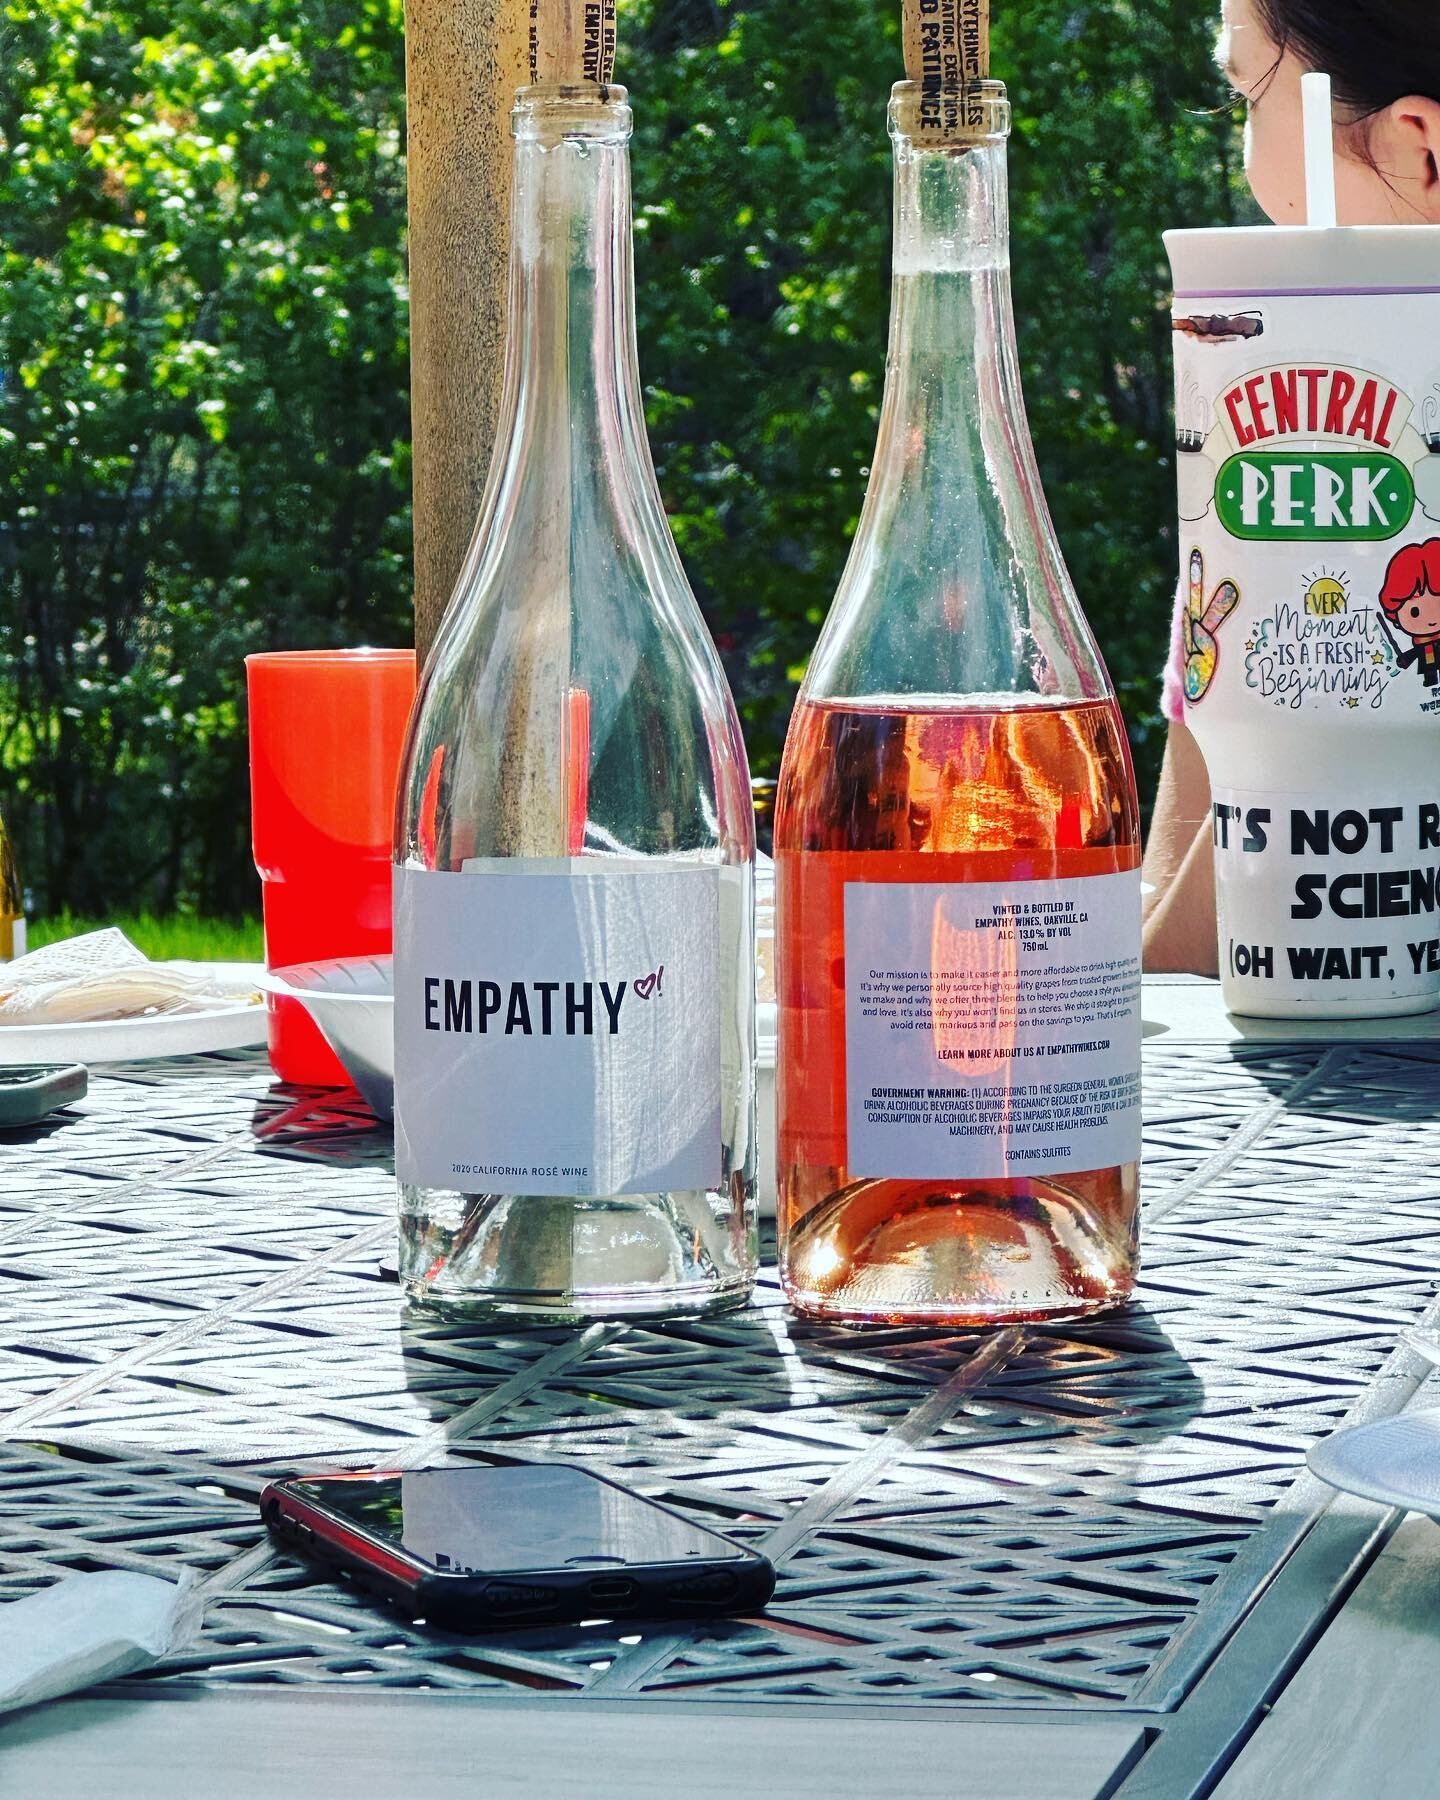 Thanks to @empathywines for making our Mother&rsquo;s Day patio dining so refreshing with the Empathy Ros&eacute; wine. So good! #wine #empathywines #garyvee #mothersday #facepunchfoods